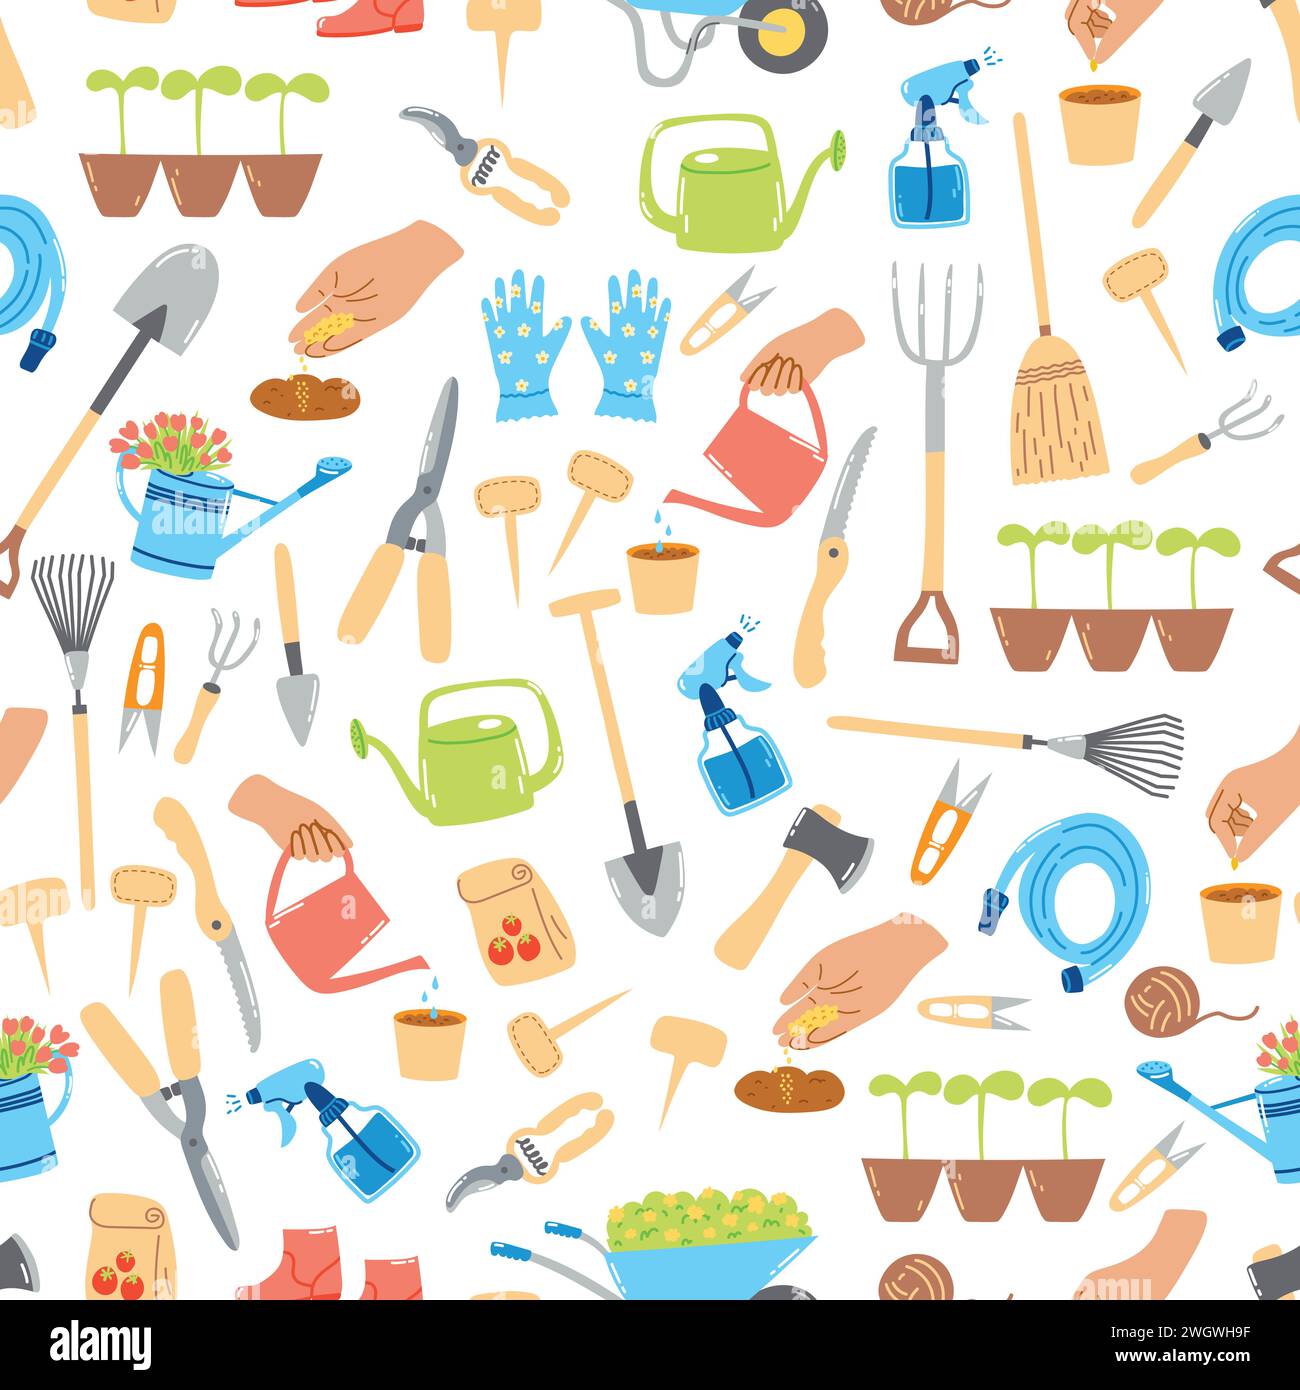 Seamless pattern with hand drawn gardening tools, agriculture equipment. Springtime wallpaper, horticulture concept. Stock Vector